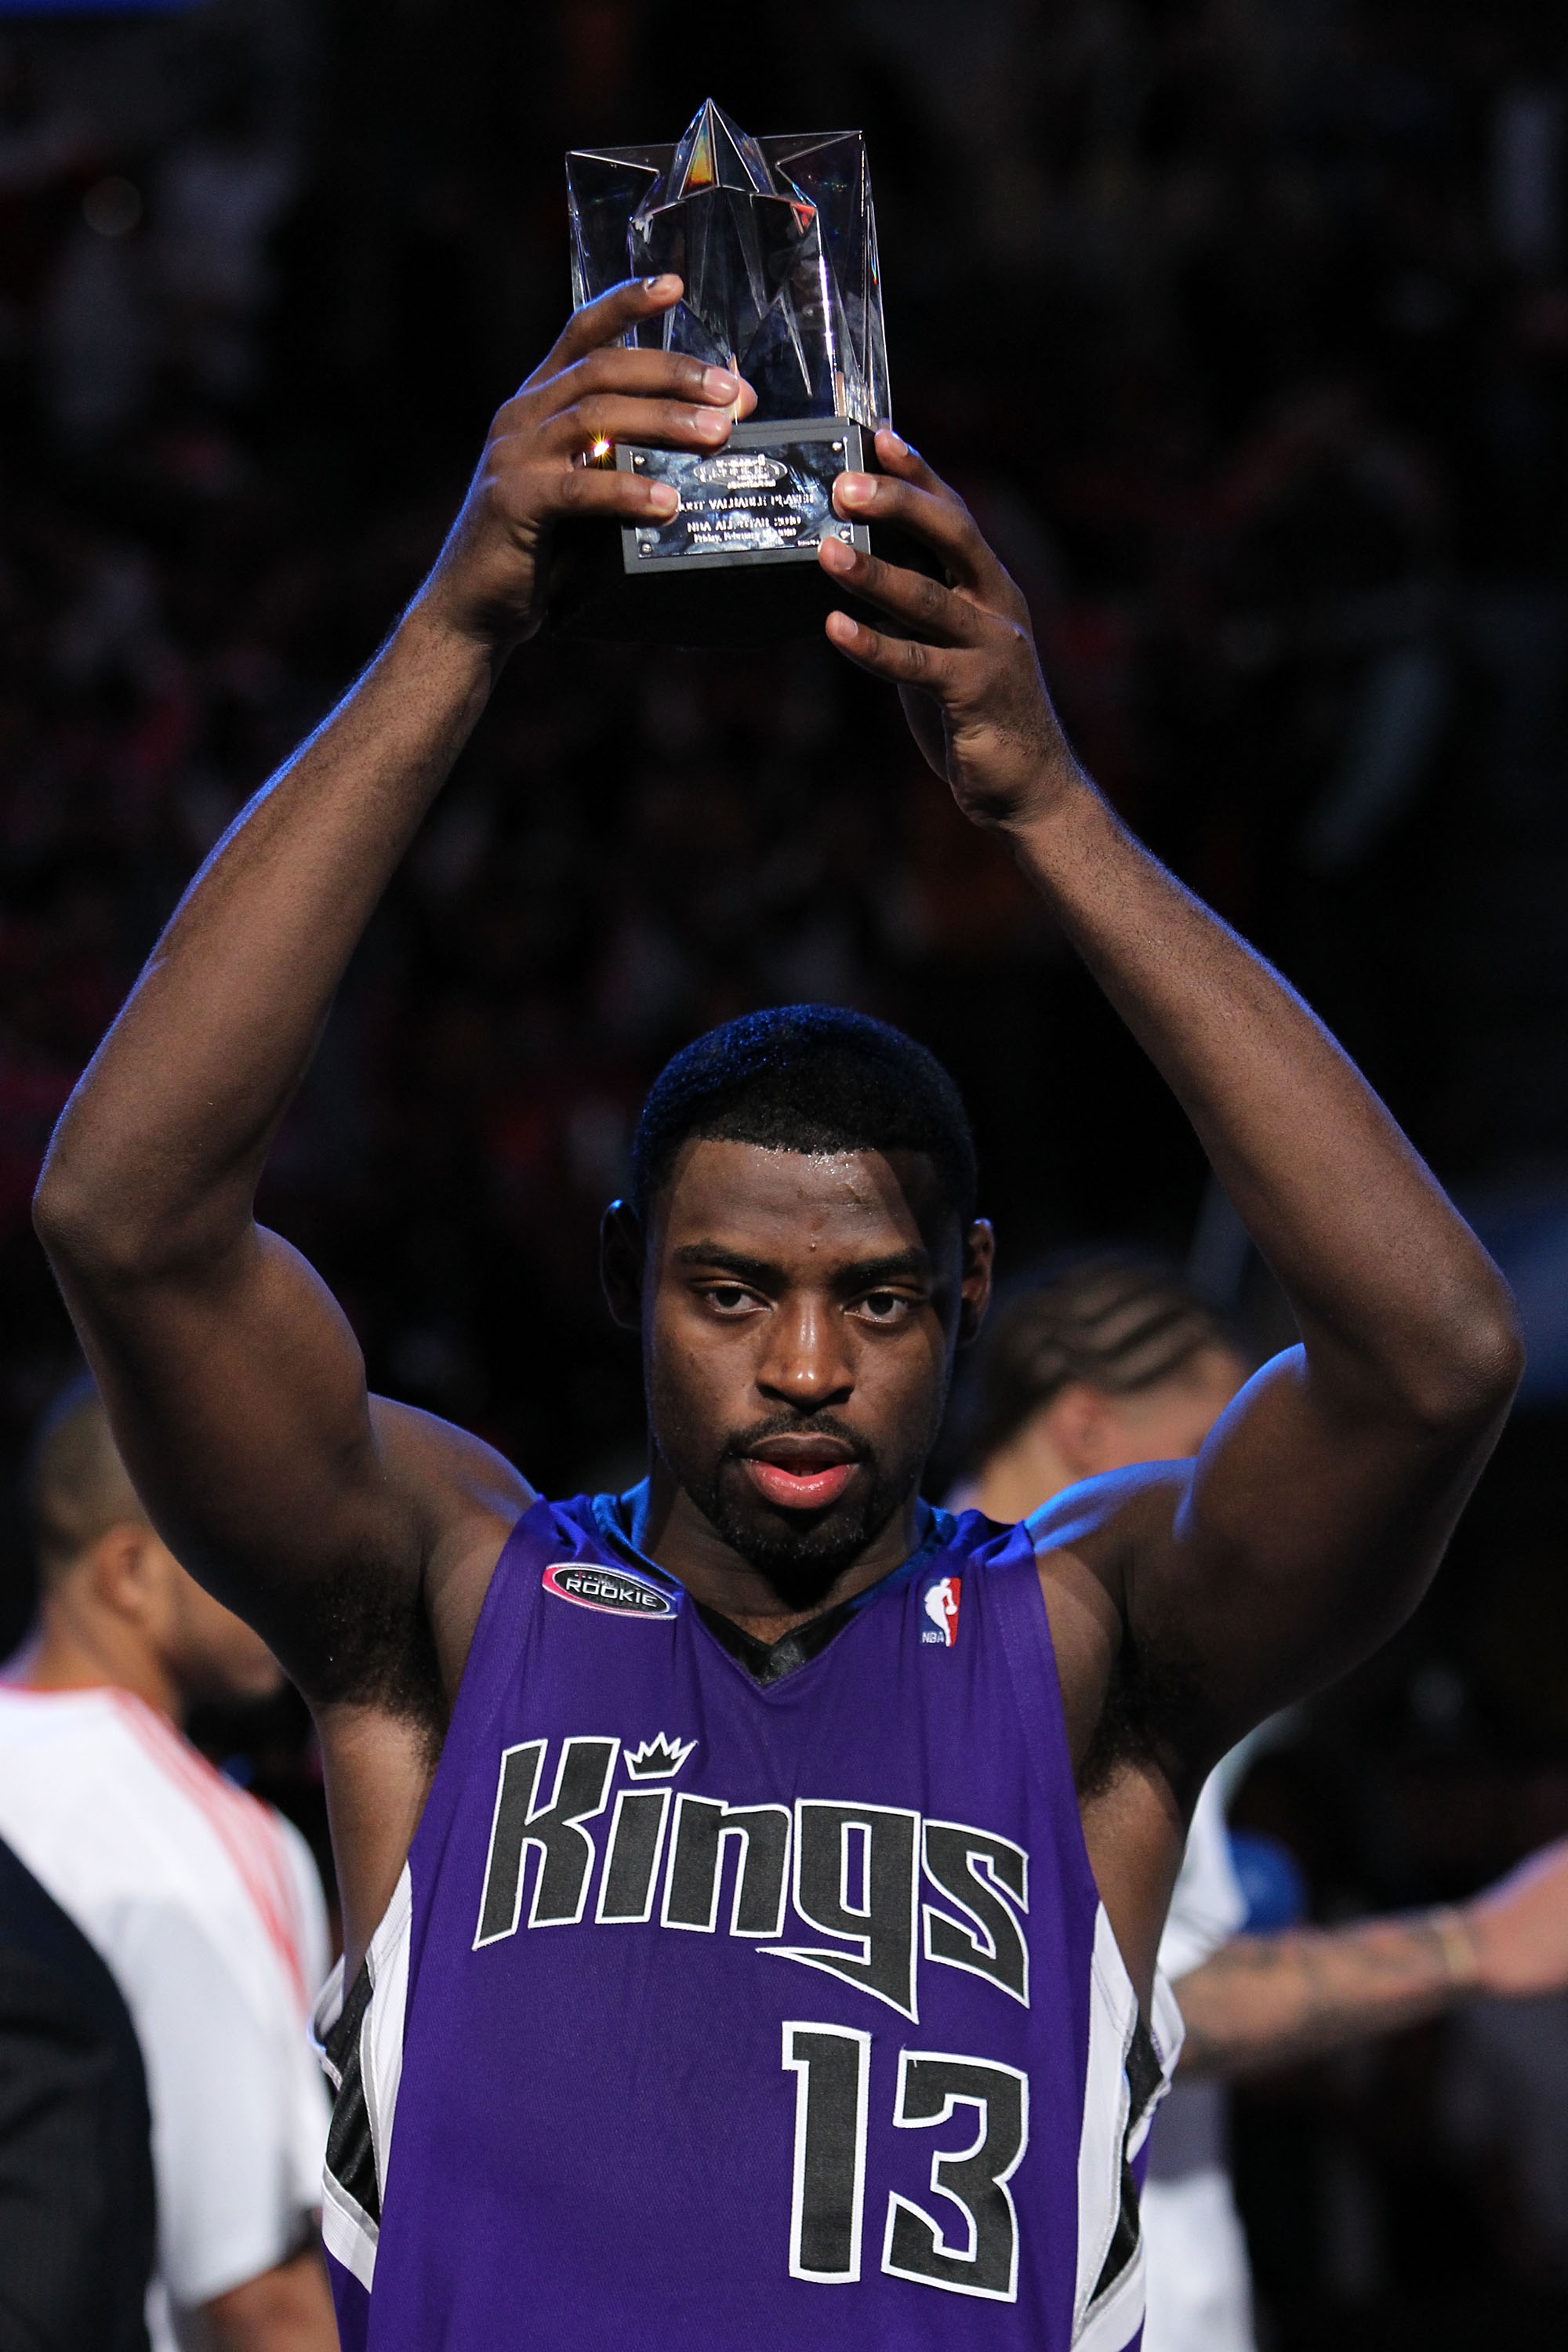 DALLAS - FEBRUARY 12:  Tyreke Evans #13 of the Rookie team holds MVP trophy after defeating the Sophomore team during the T-Mobile Rookie Challenge & Youth Jam part of 2010 NBA All-Star Weekend at American Airlines Center on February 12, 2010 in Dallas, T